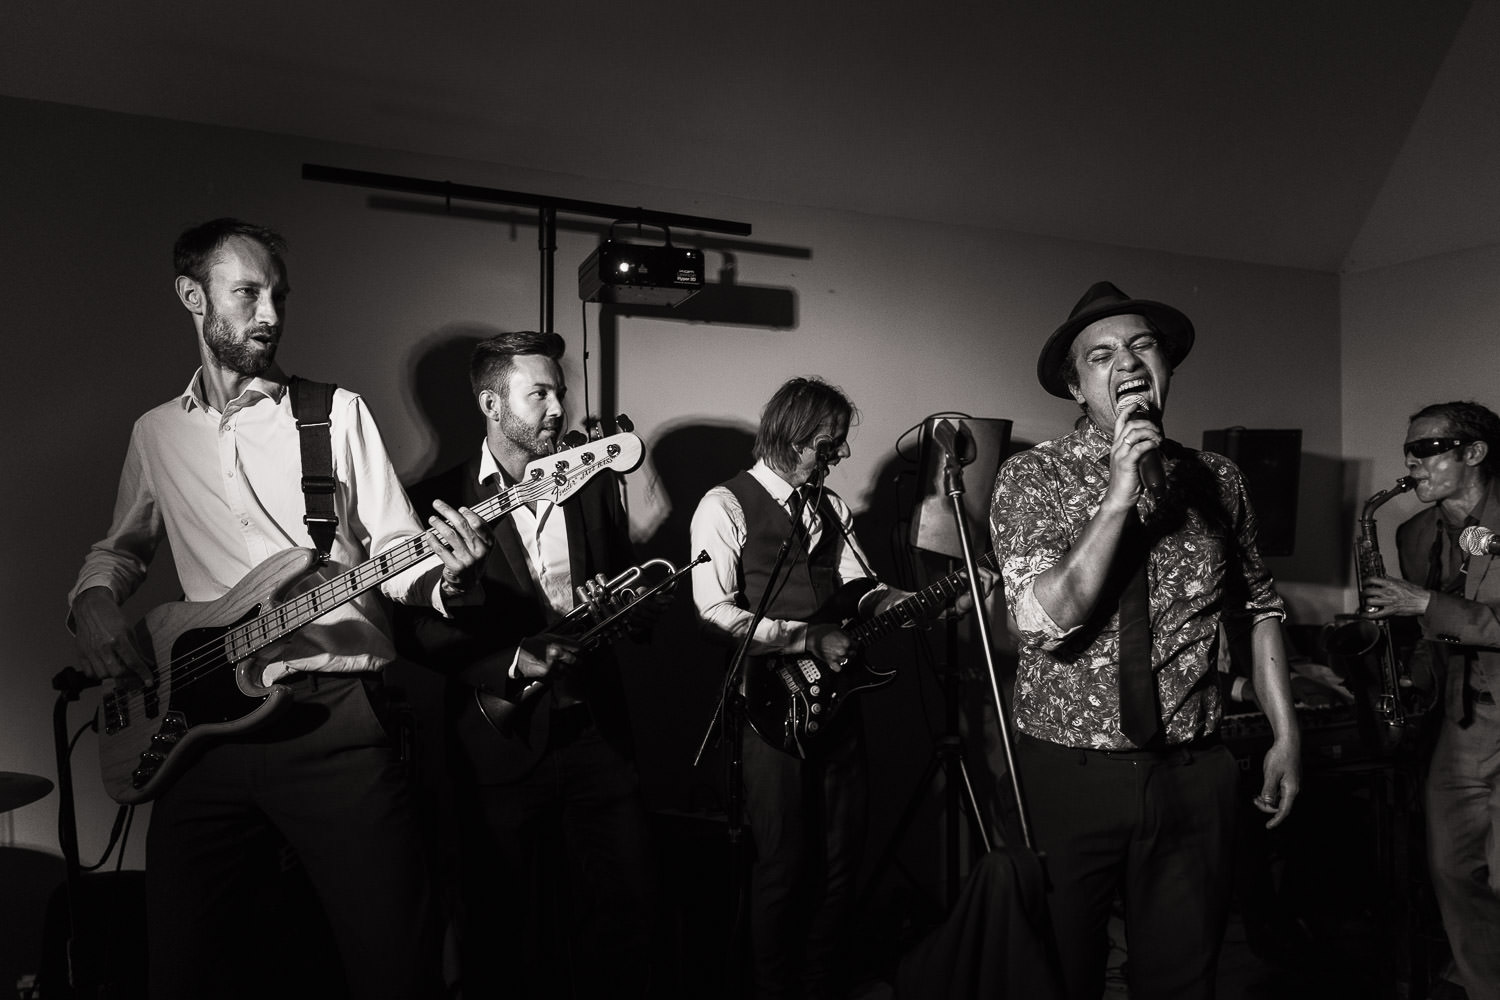 Oomphf funk band performing at a wedding at Houchins, an Essex wedding venue.
Live music at weddings.